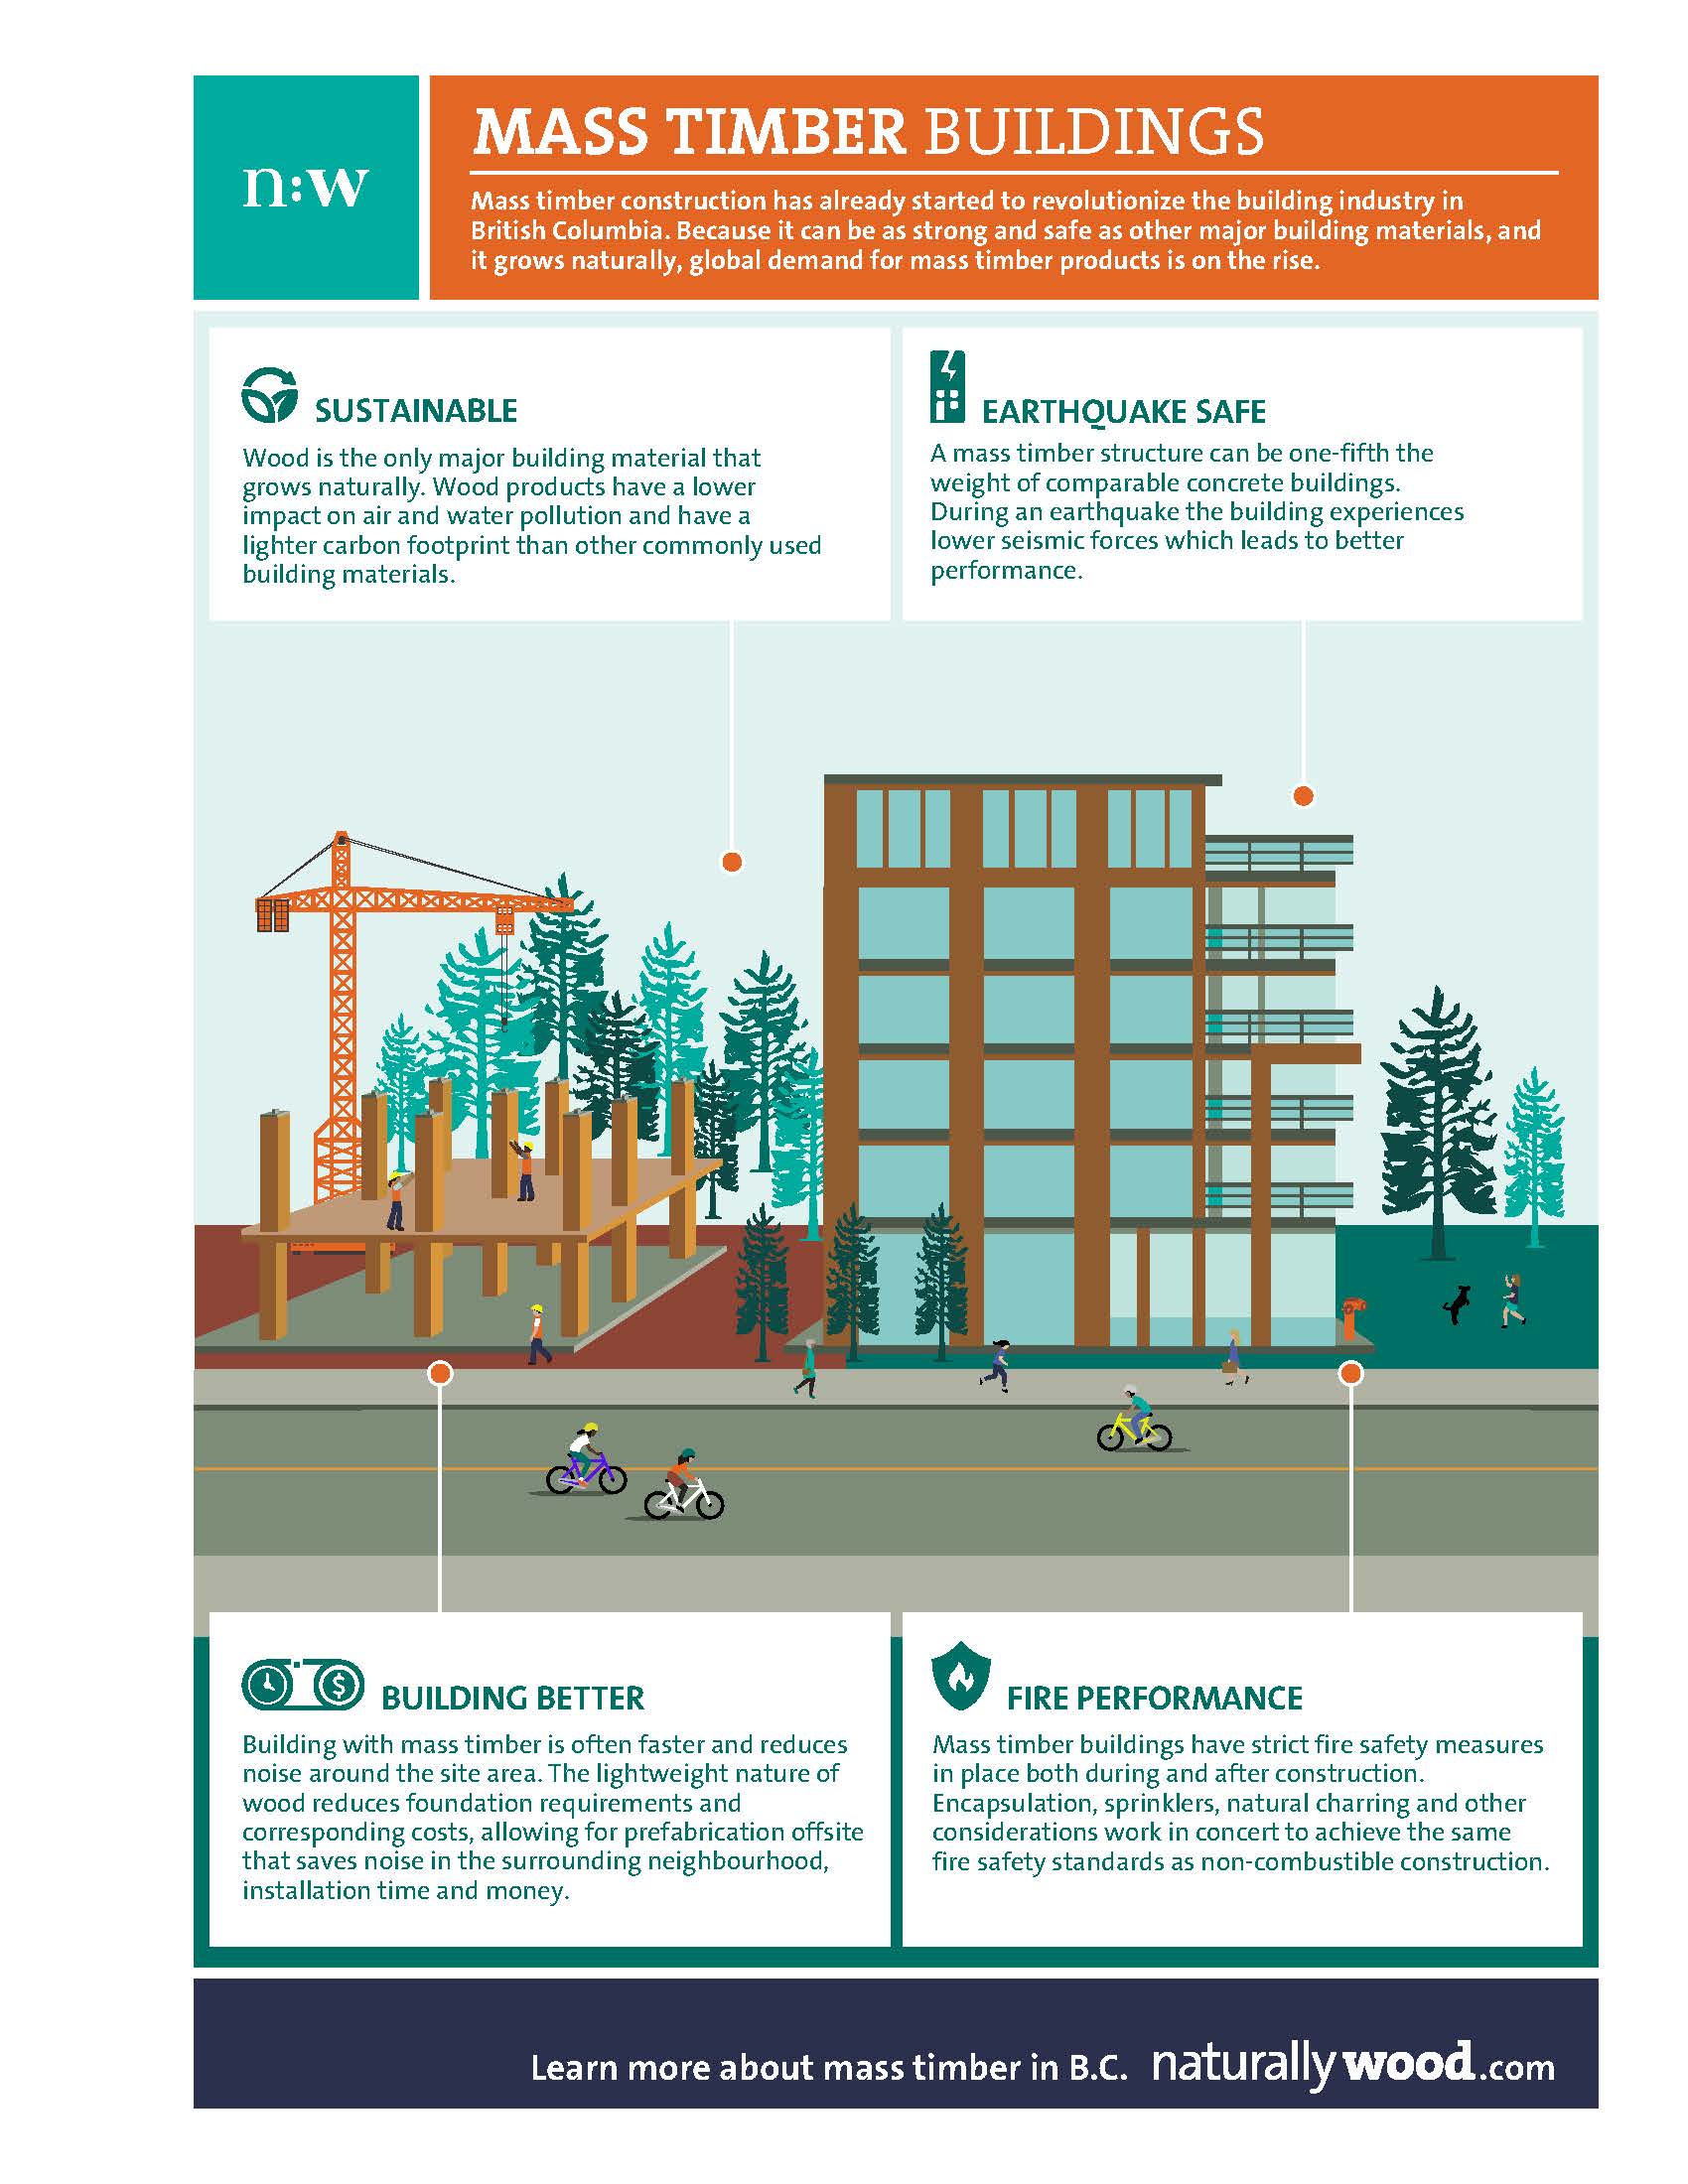 Infographic showing the performance advantages of wood detailing 4 performance measures.